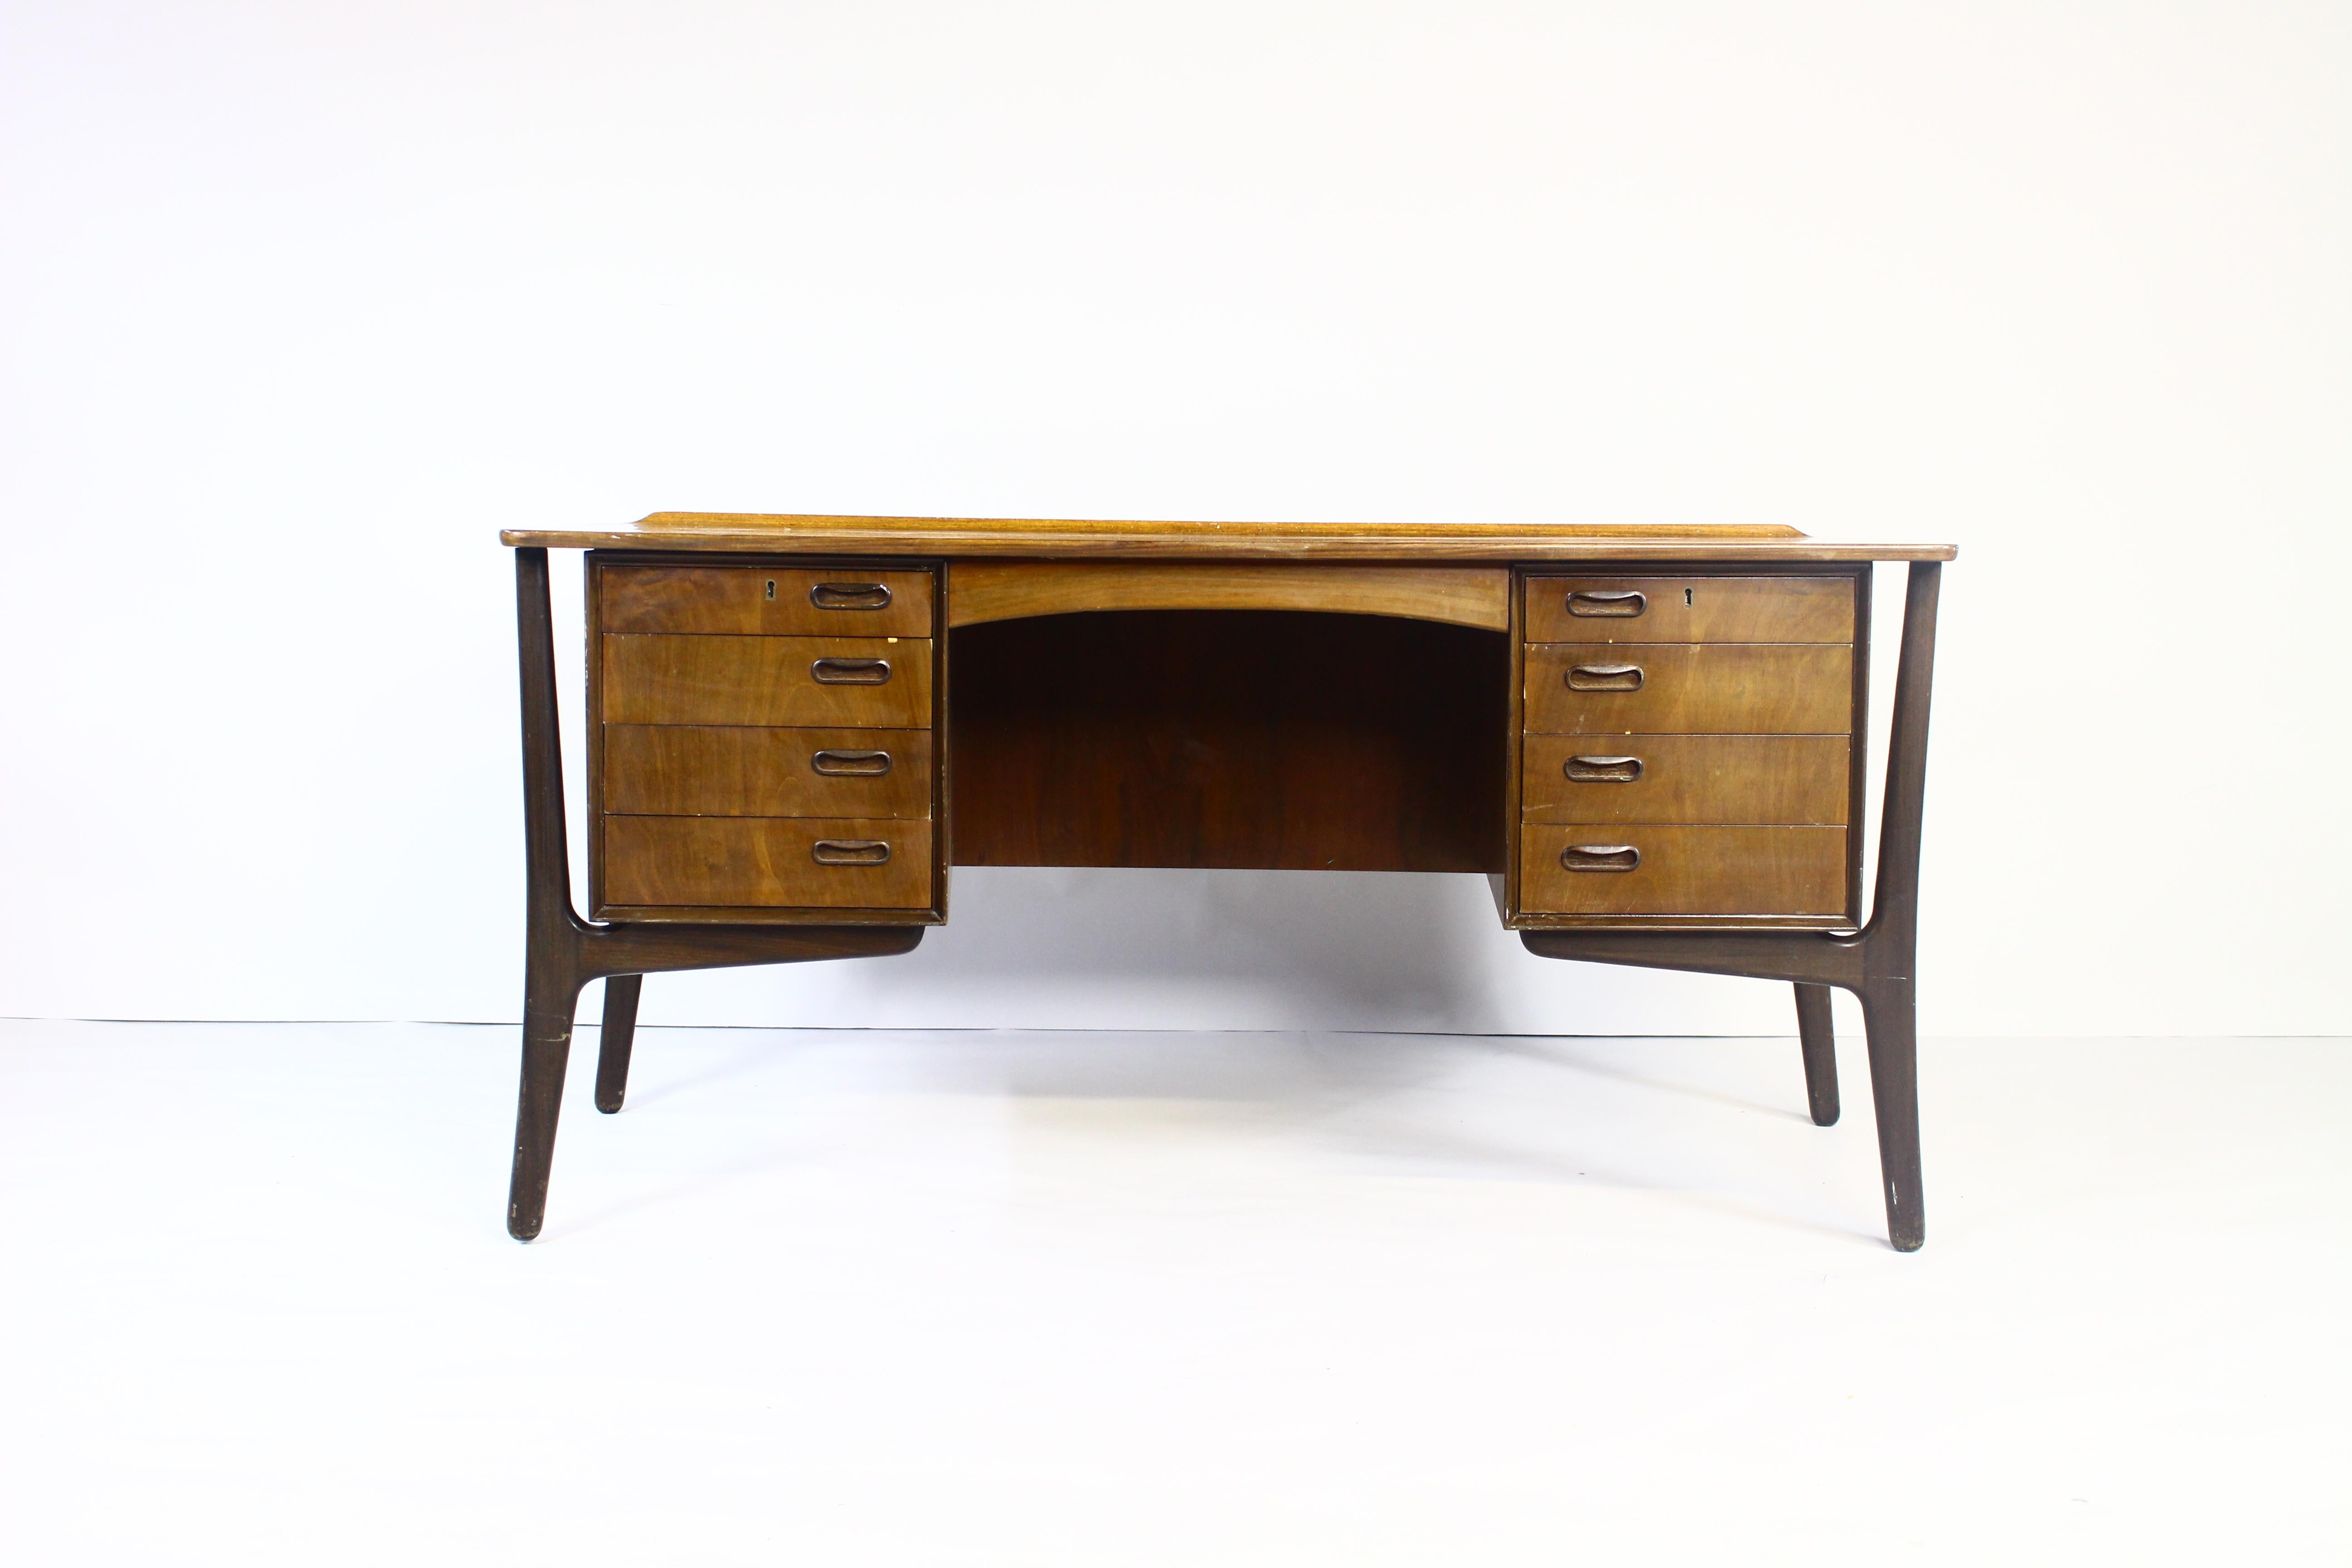 Danish walnut desk with eight-drawers and open shelf at the back on sculpture-like legs,
designed by Svend Aage Madsen.